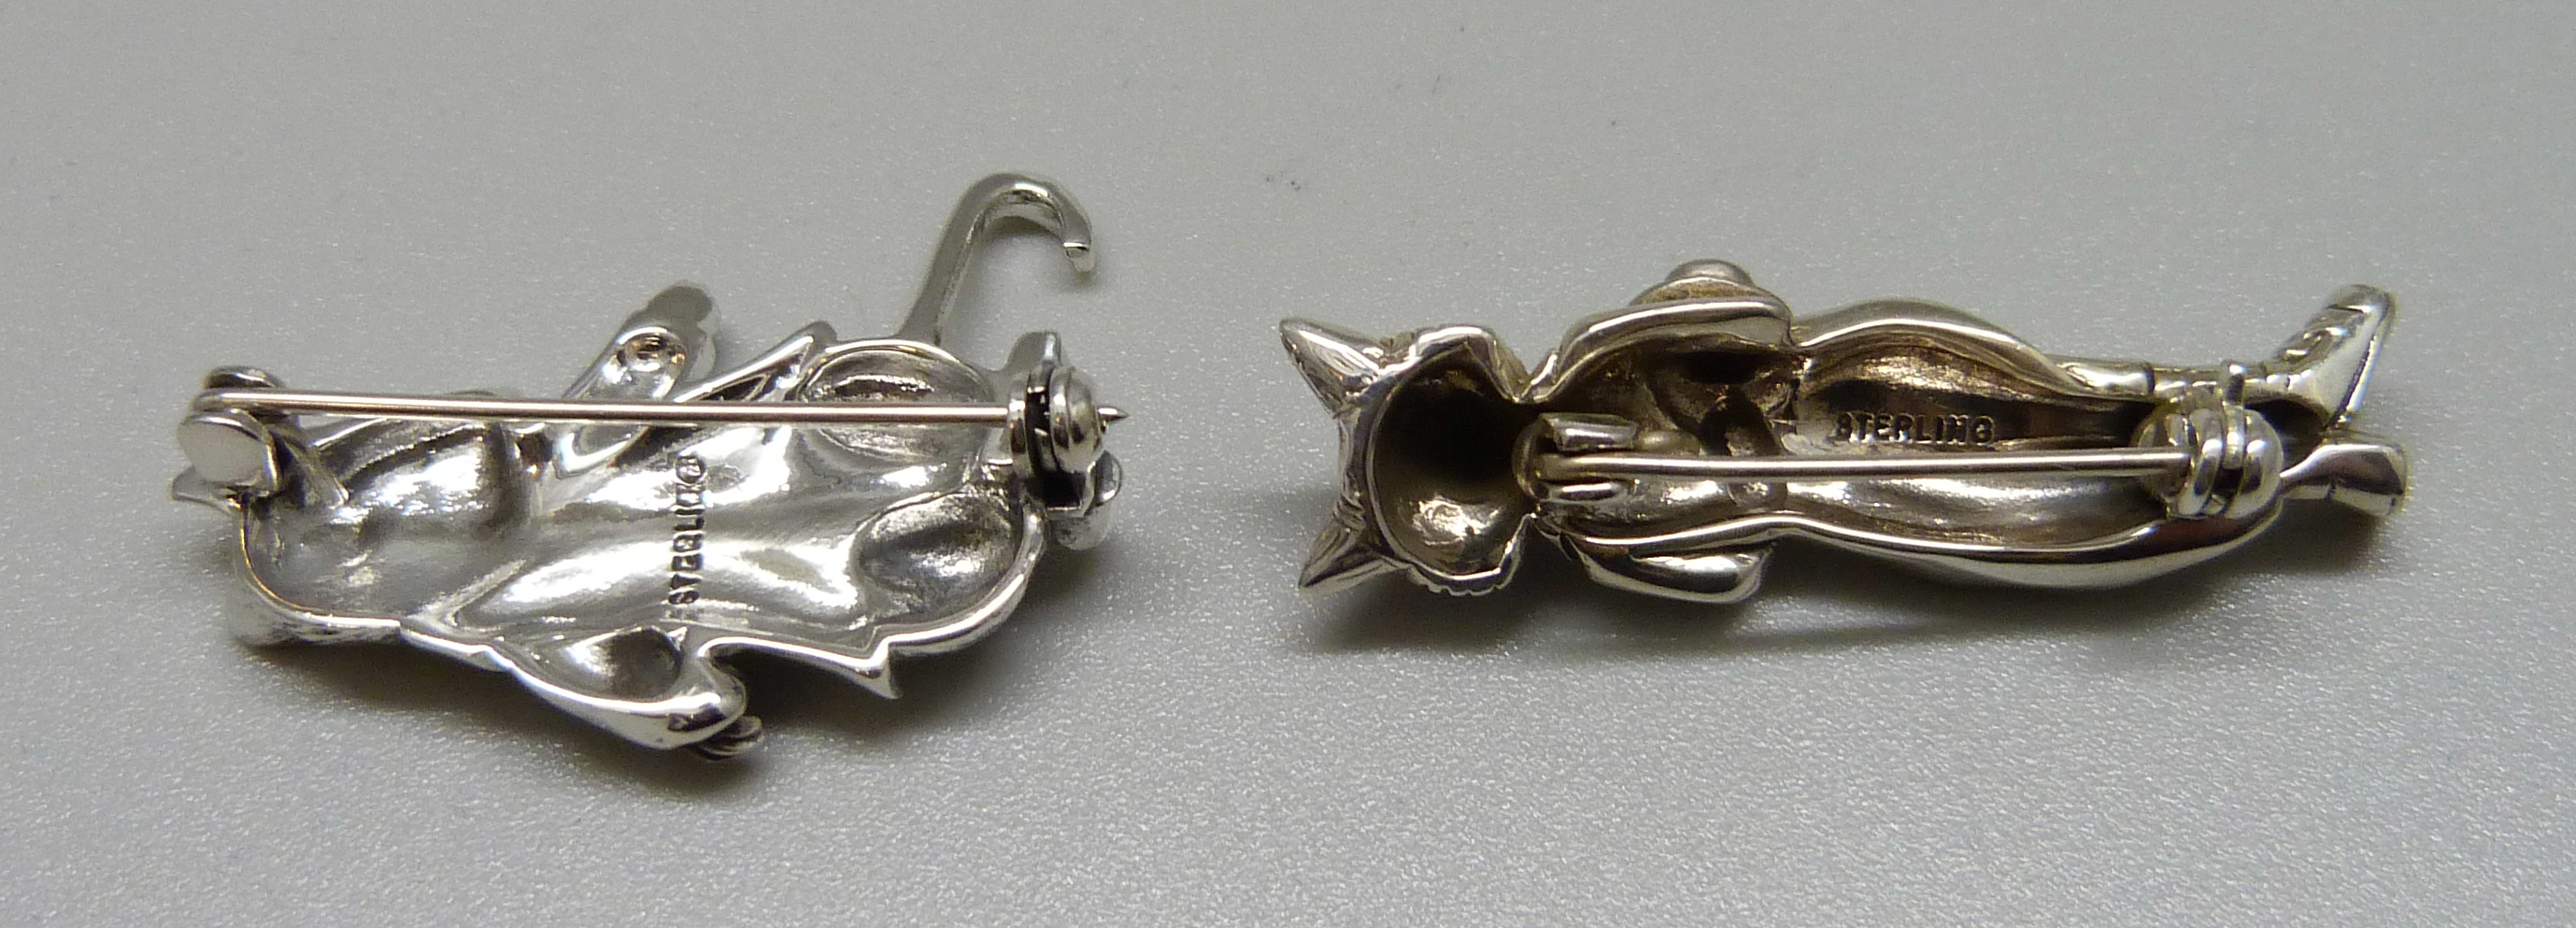 A silver gentleman fox brooch and a silver mouse brooch, 13.7g - Image 2 of 2